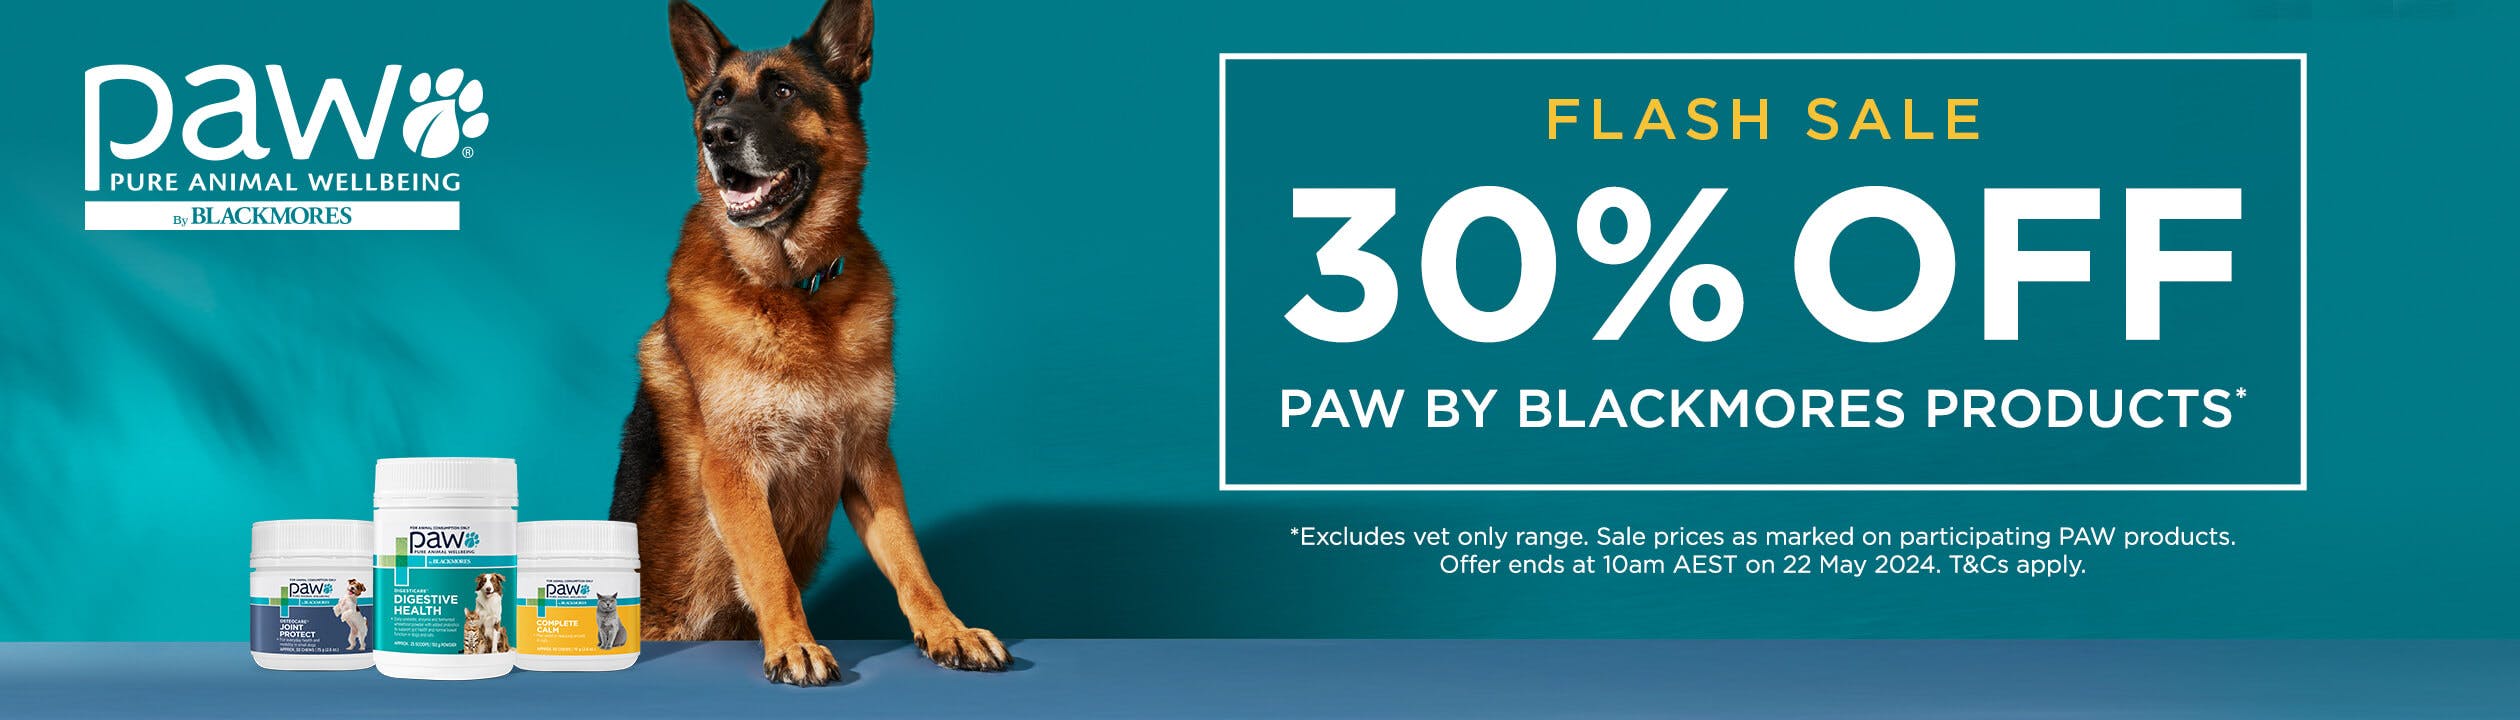 PAW_May_FlashSale_24_SHOP_BANNER_2520x720